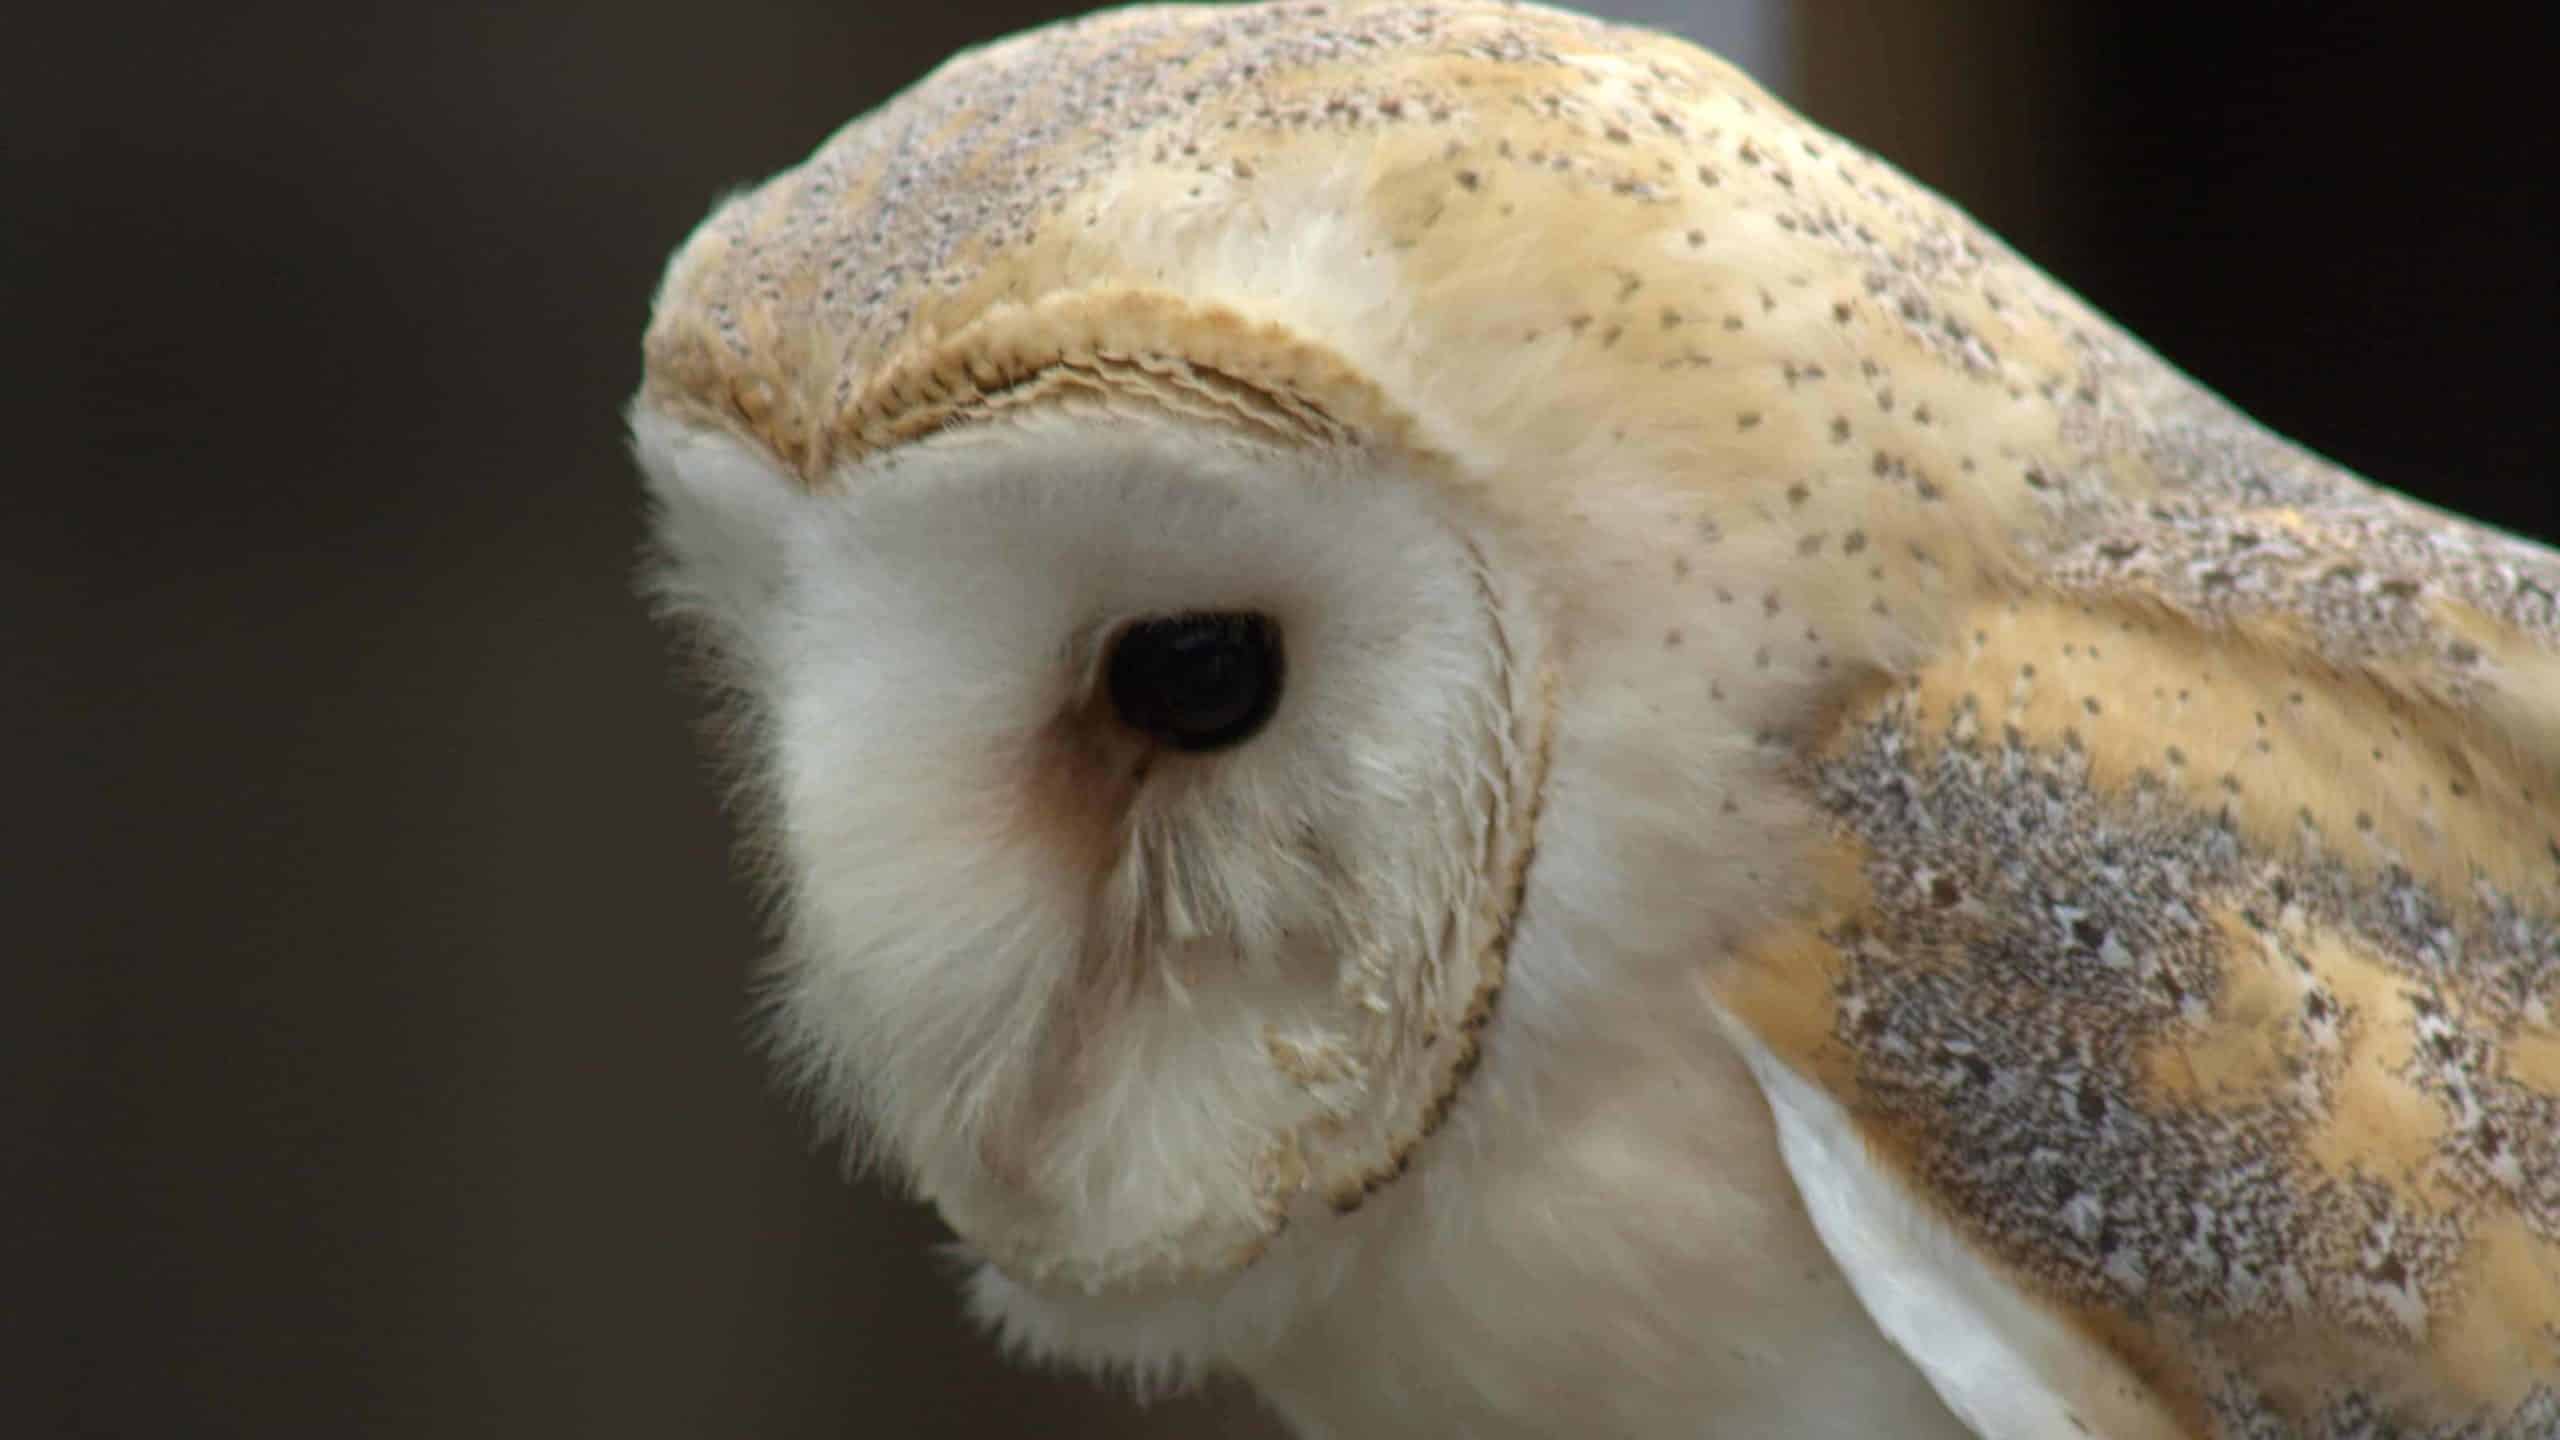 A barn owl looks out in profile, with buff and cream feathers and dark eyes.